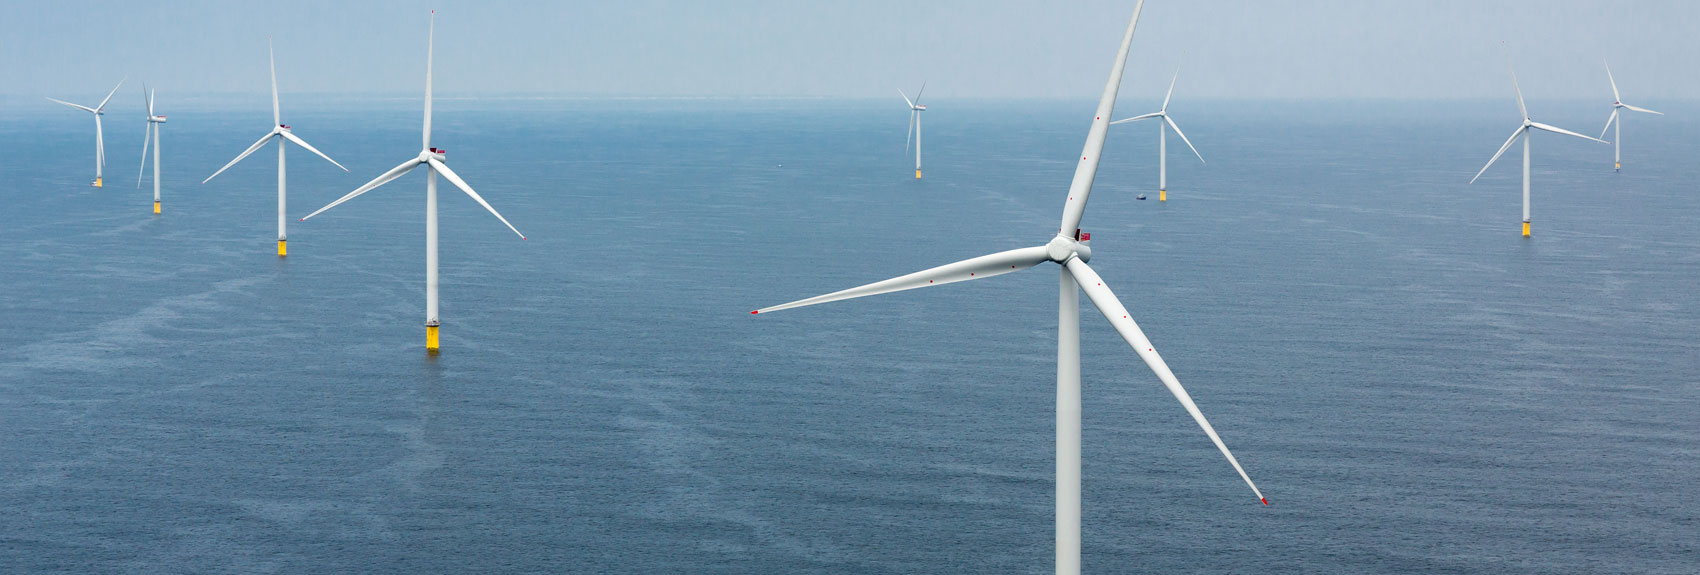 An aerial photo of the Galloper offshore wind farm in the UK